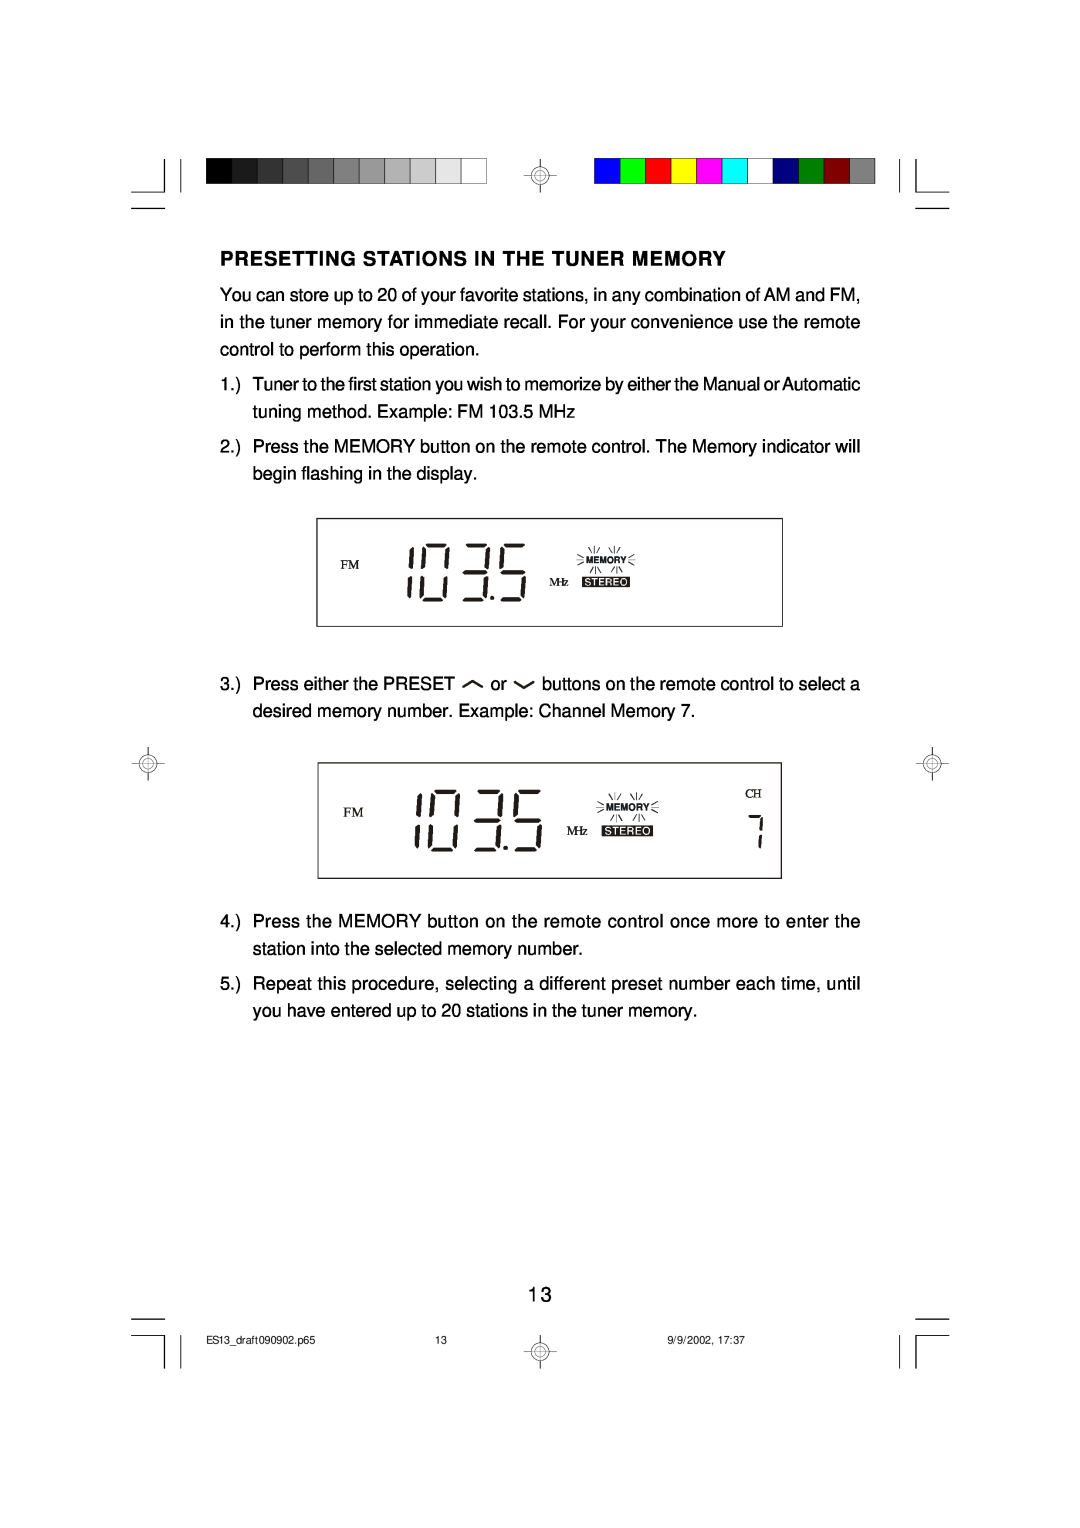 Emerson ES13 owner manual Presetting Stations In The Tuner Memory 